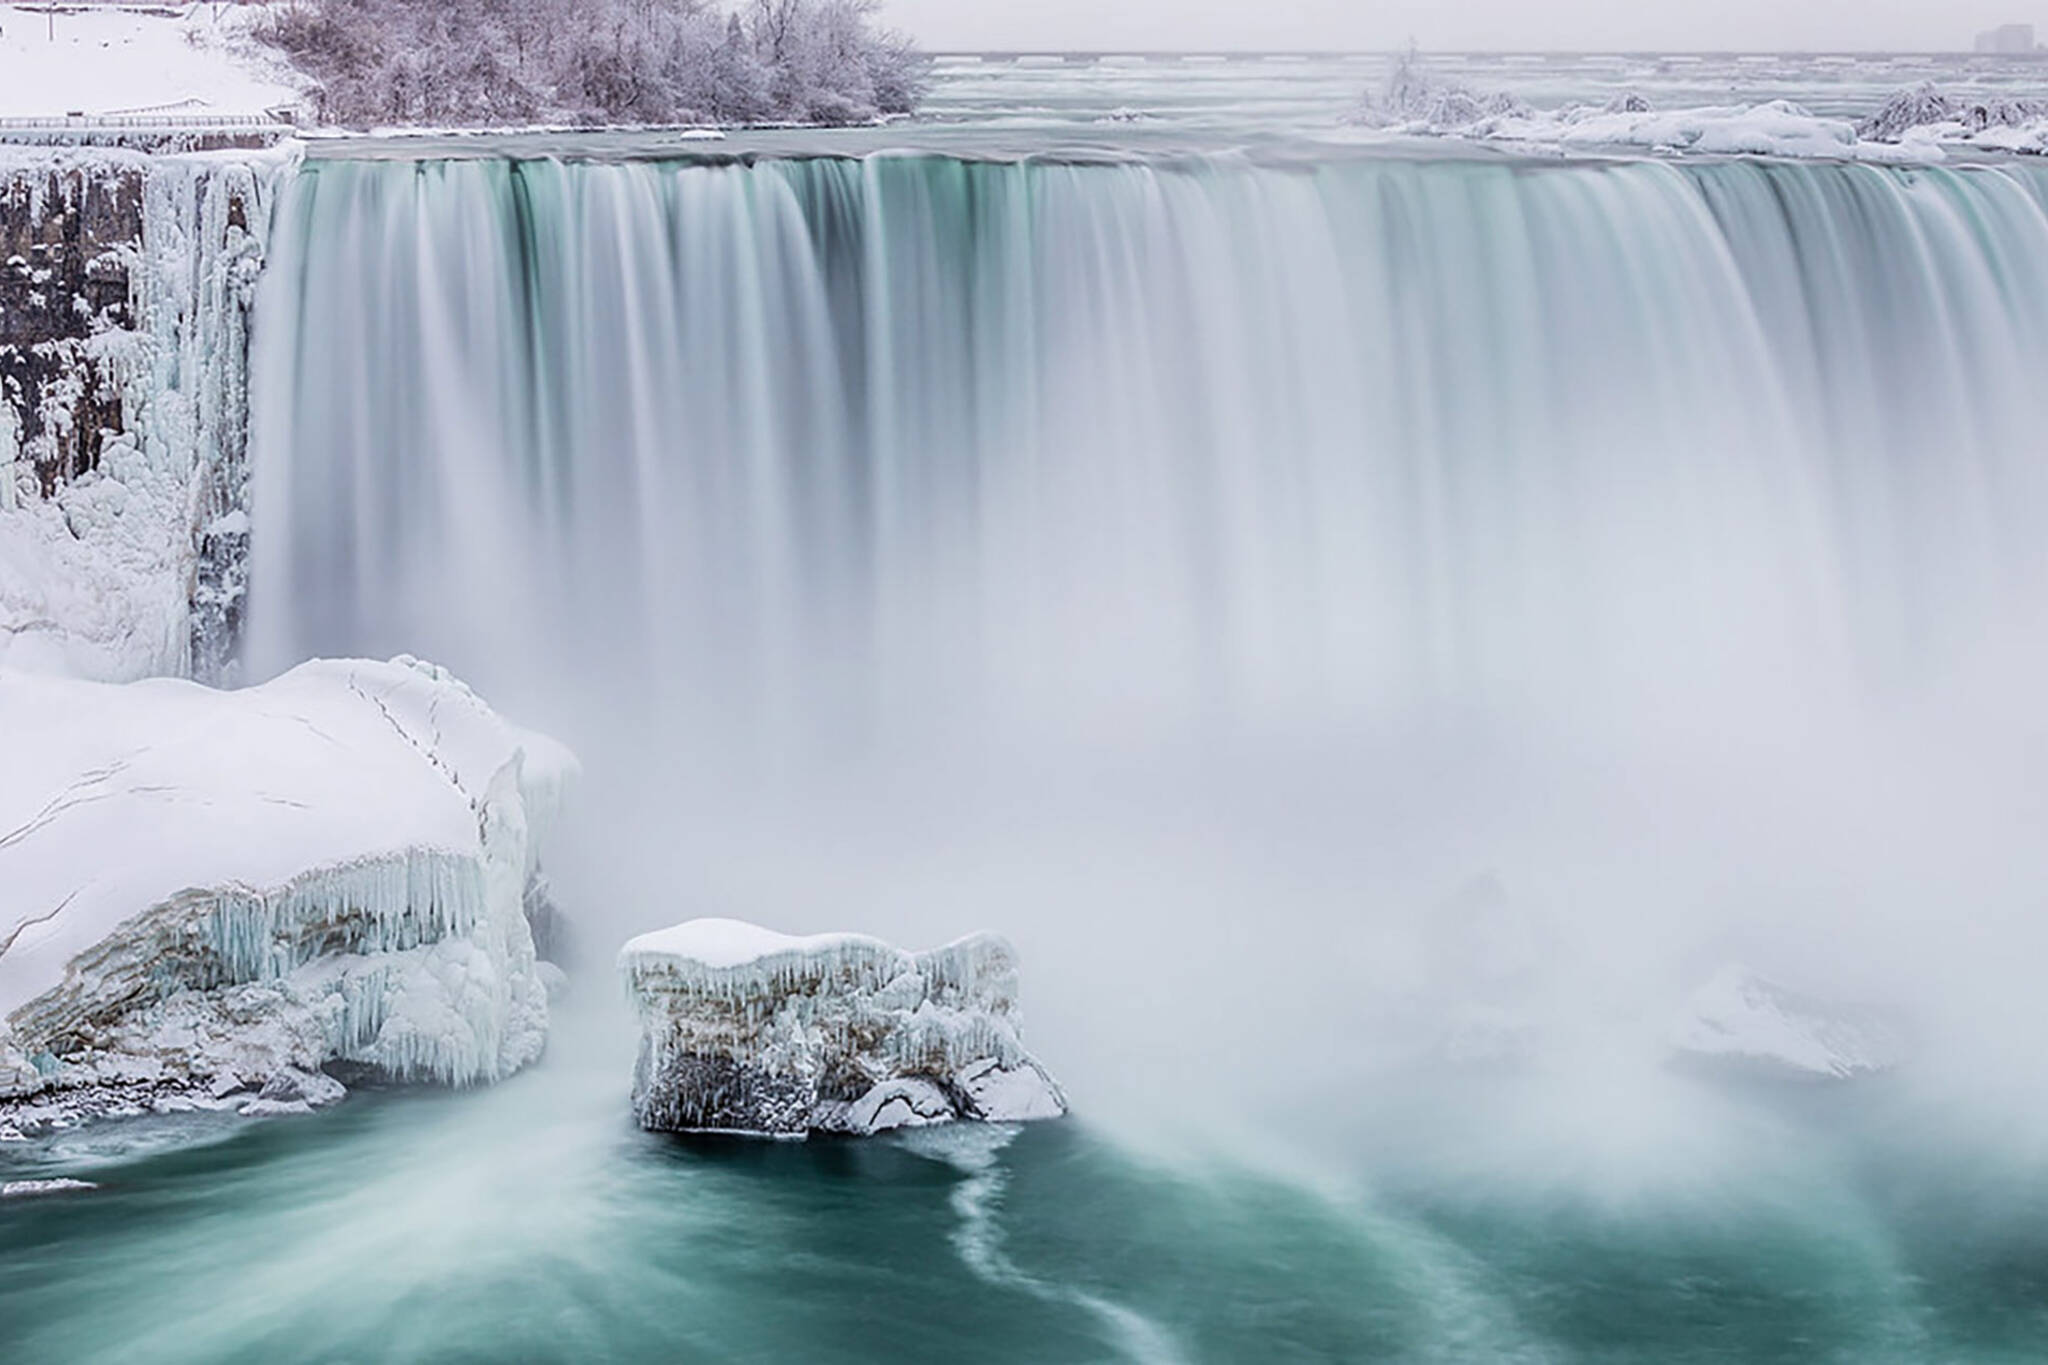 Niagara Falls is completely frozen over and it's so incredibly